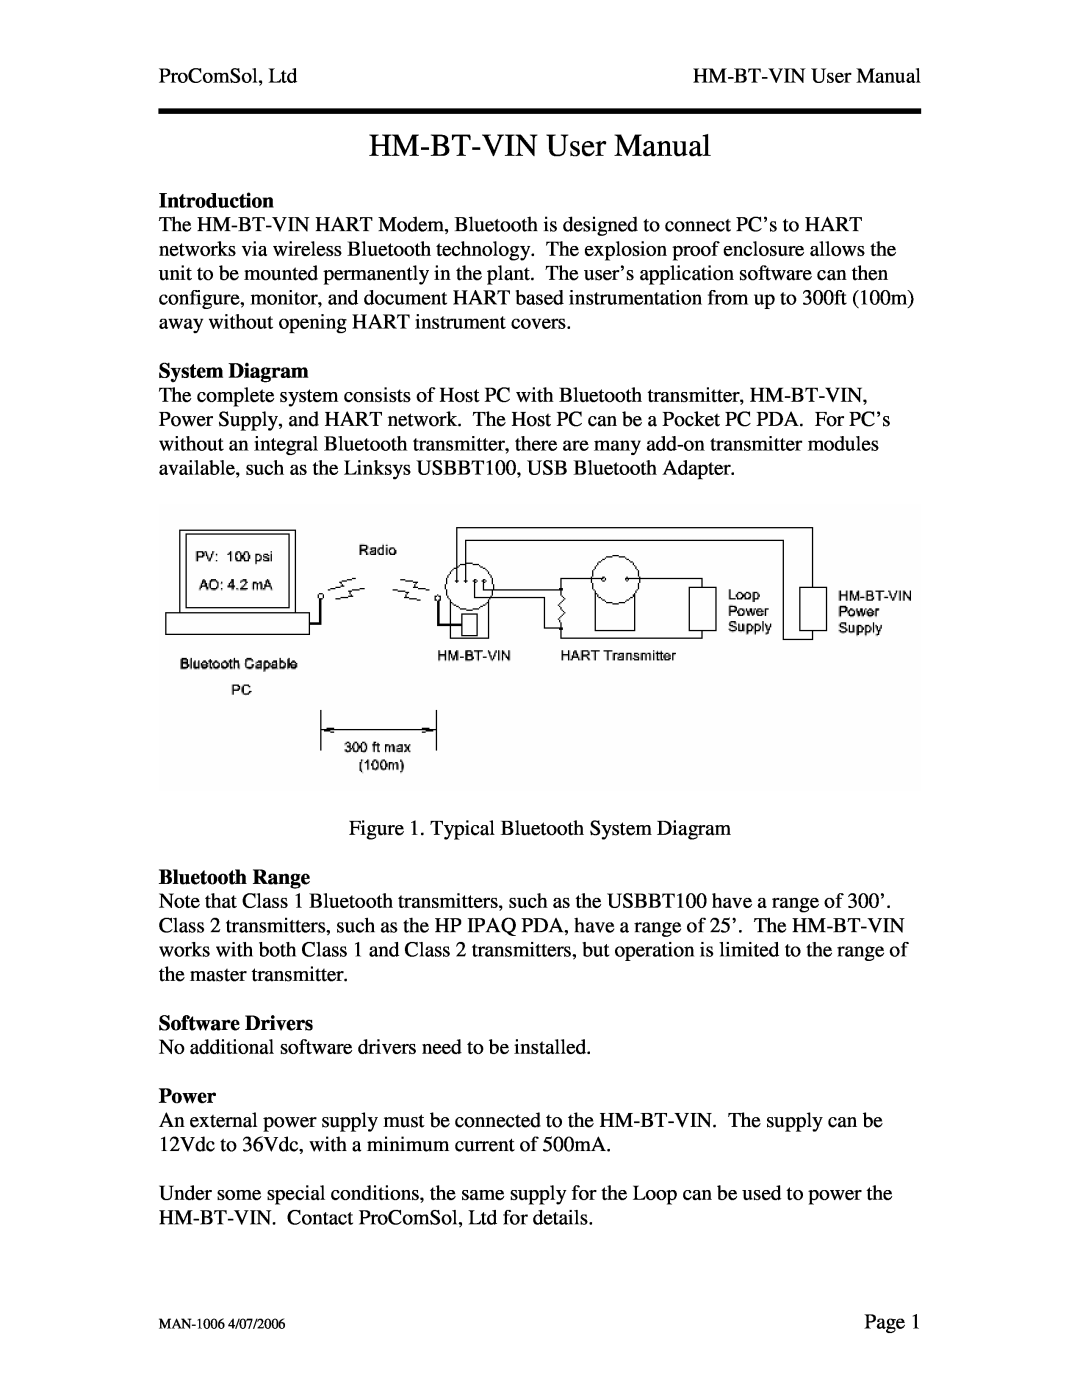 Linksys HM-BT-VIN user manual Introduction, System Diagram, Bluetooth Range, Software Drivers, Power 